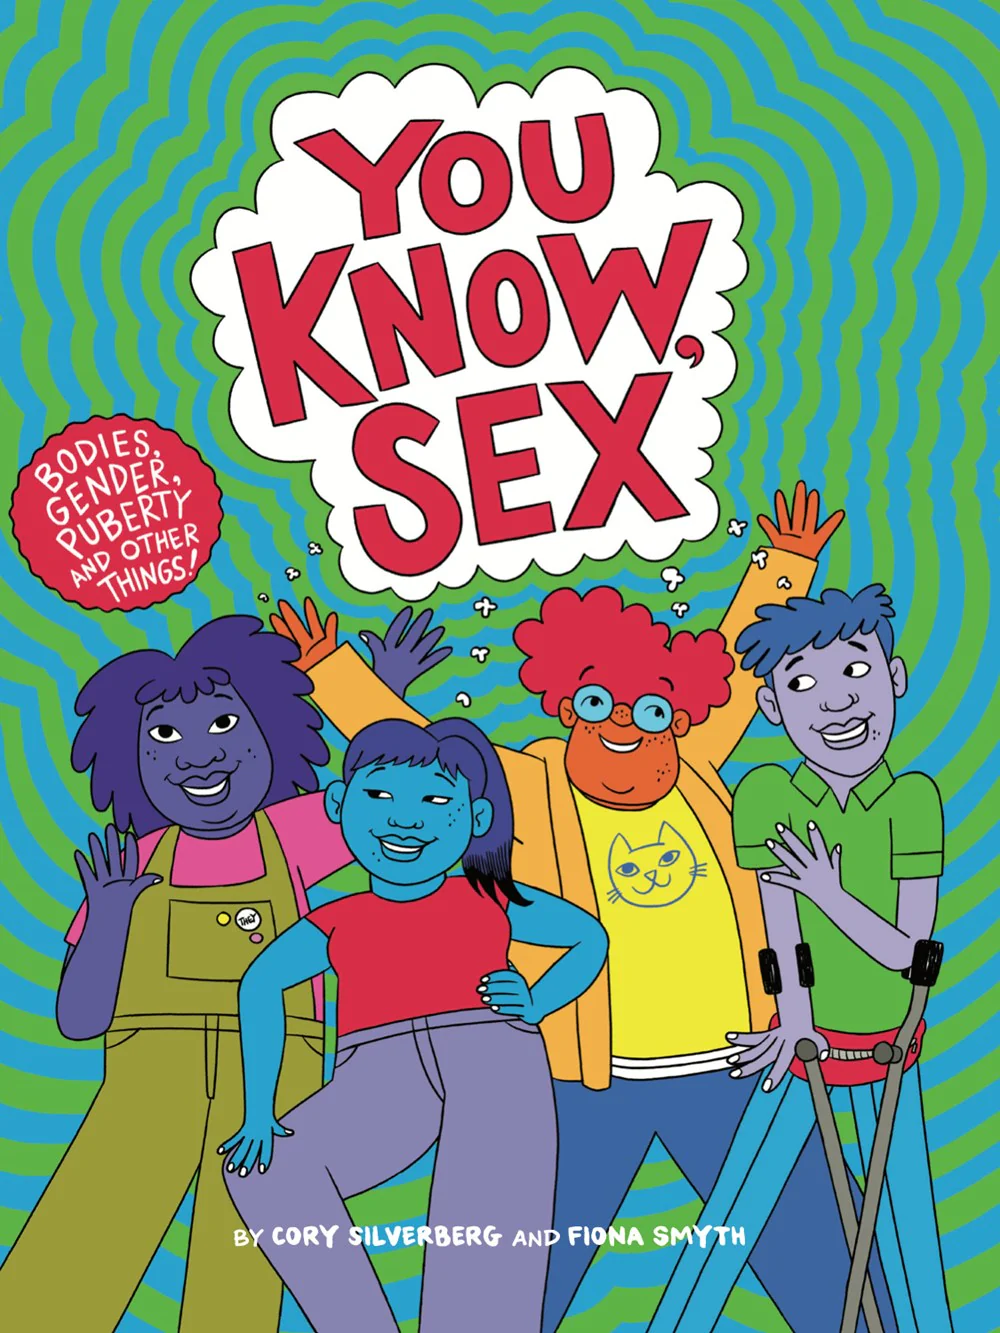 You Know, Sex: Bodies, Gender, Puberty, and Other Things book cover